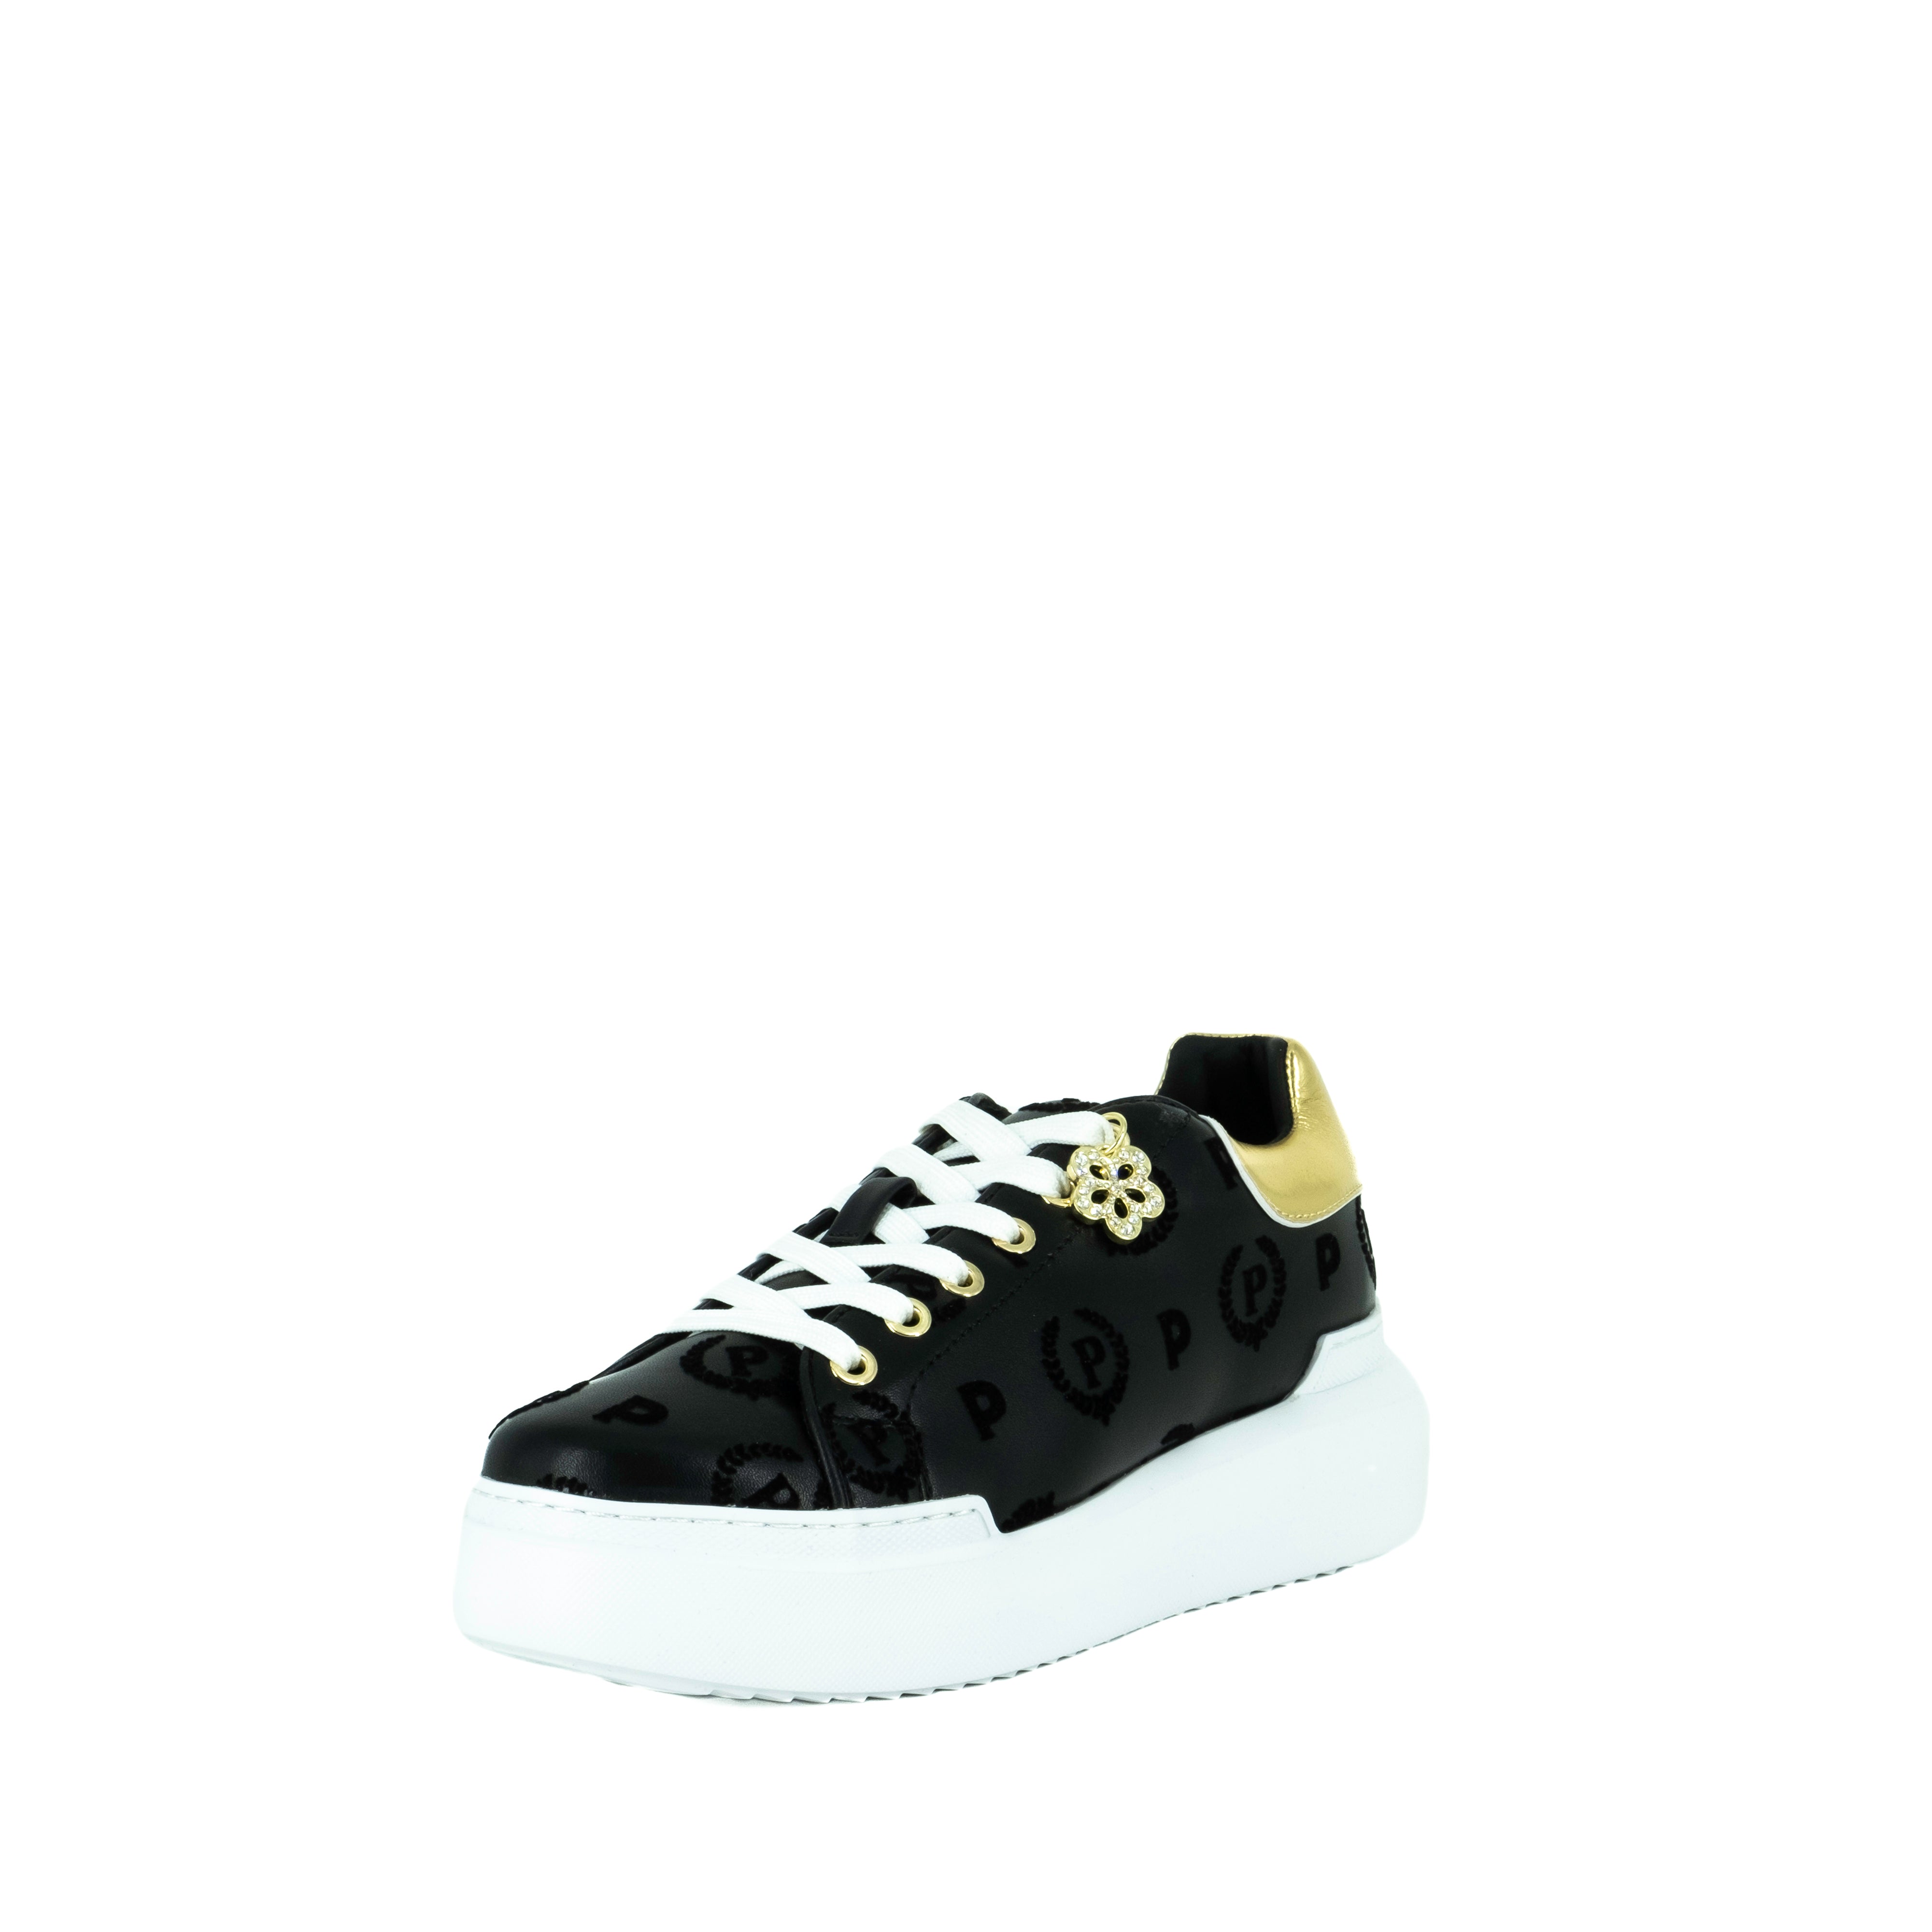 Pollini Women's Heritage Black Sneakers with Gold Details